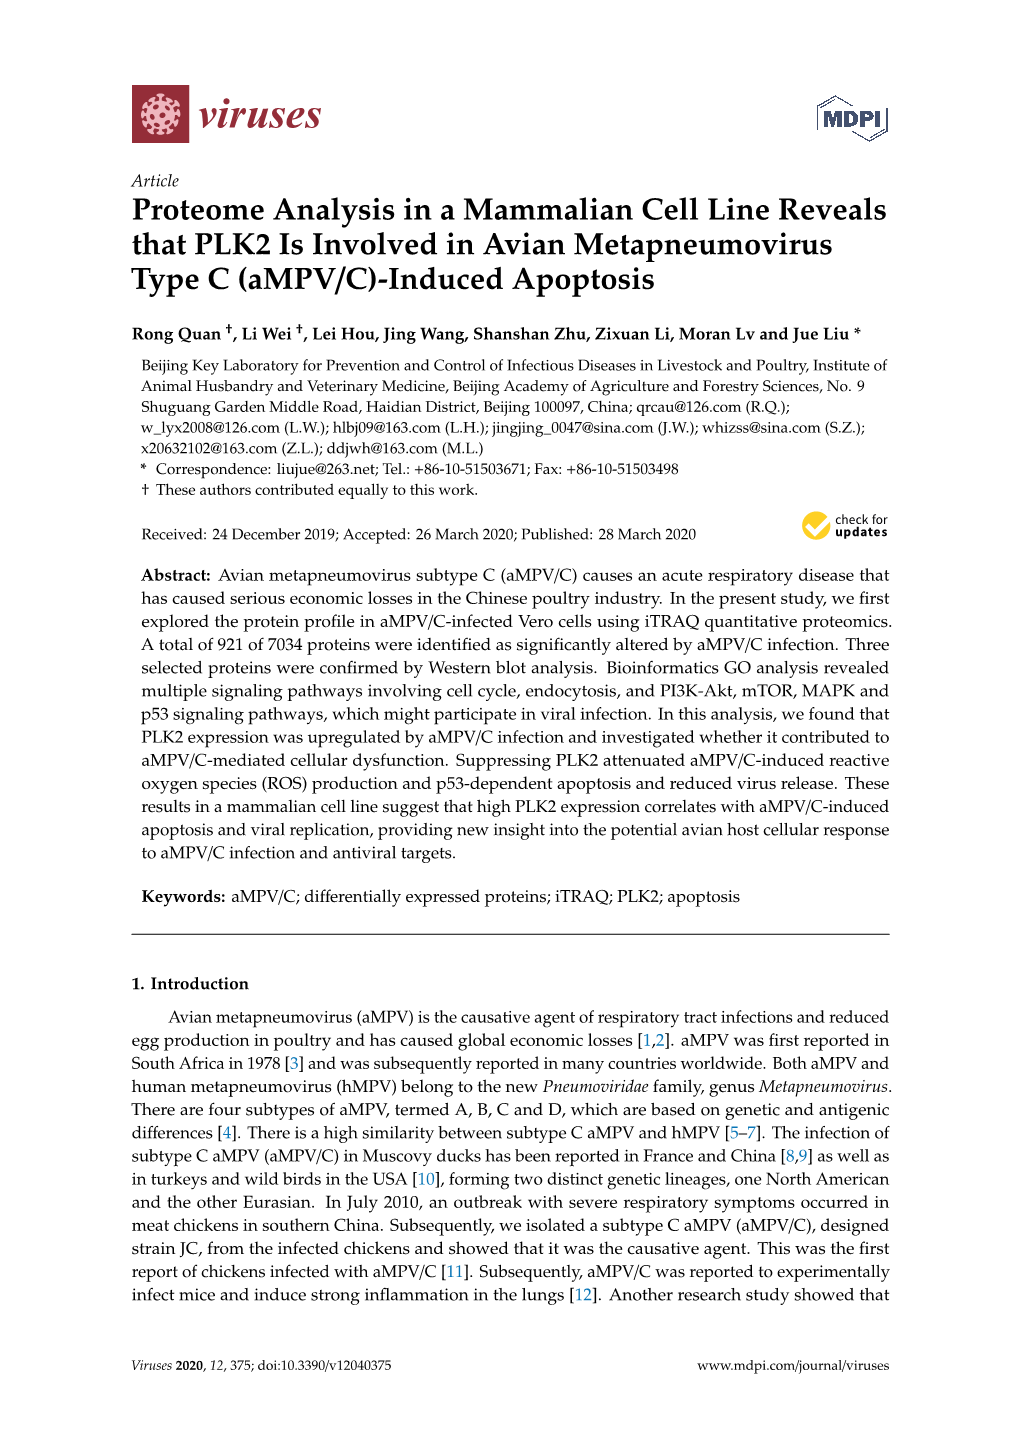 Proteome Analysis in a Mammalian Cell Line Reveals That PLK2 Is Involved in Avian Metapneumovirus Type C (Ampv/C)-Induced Apoptosis